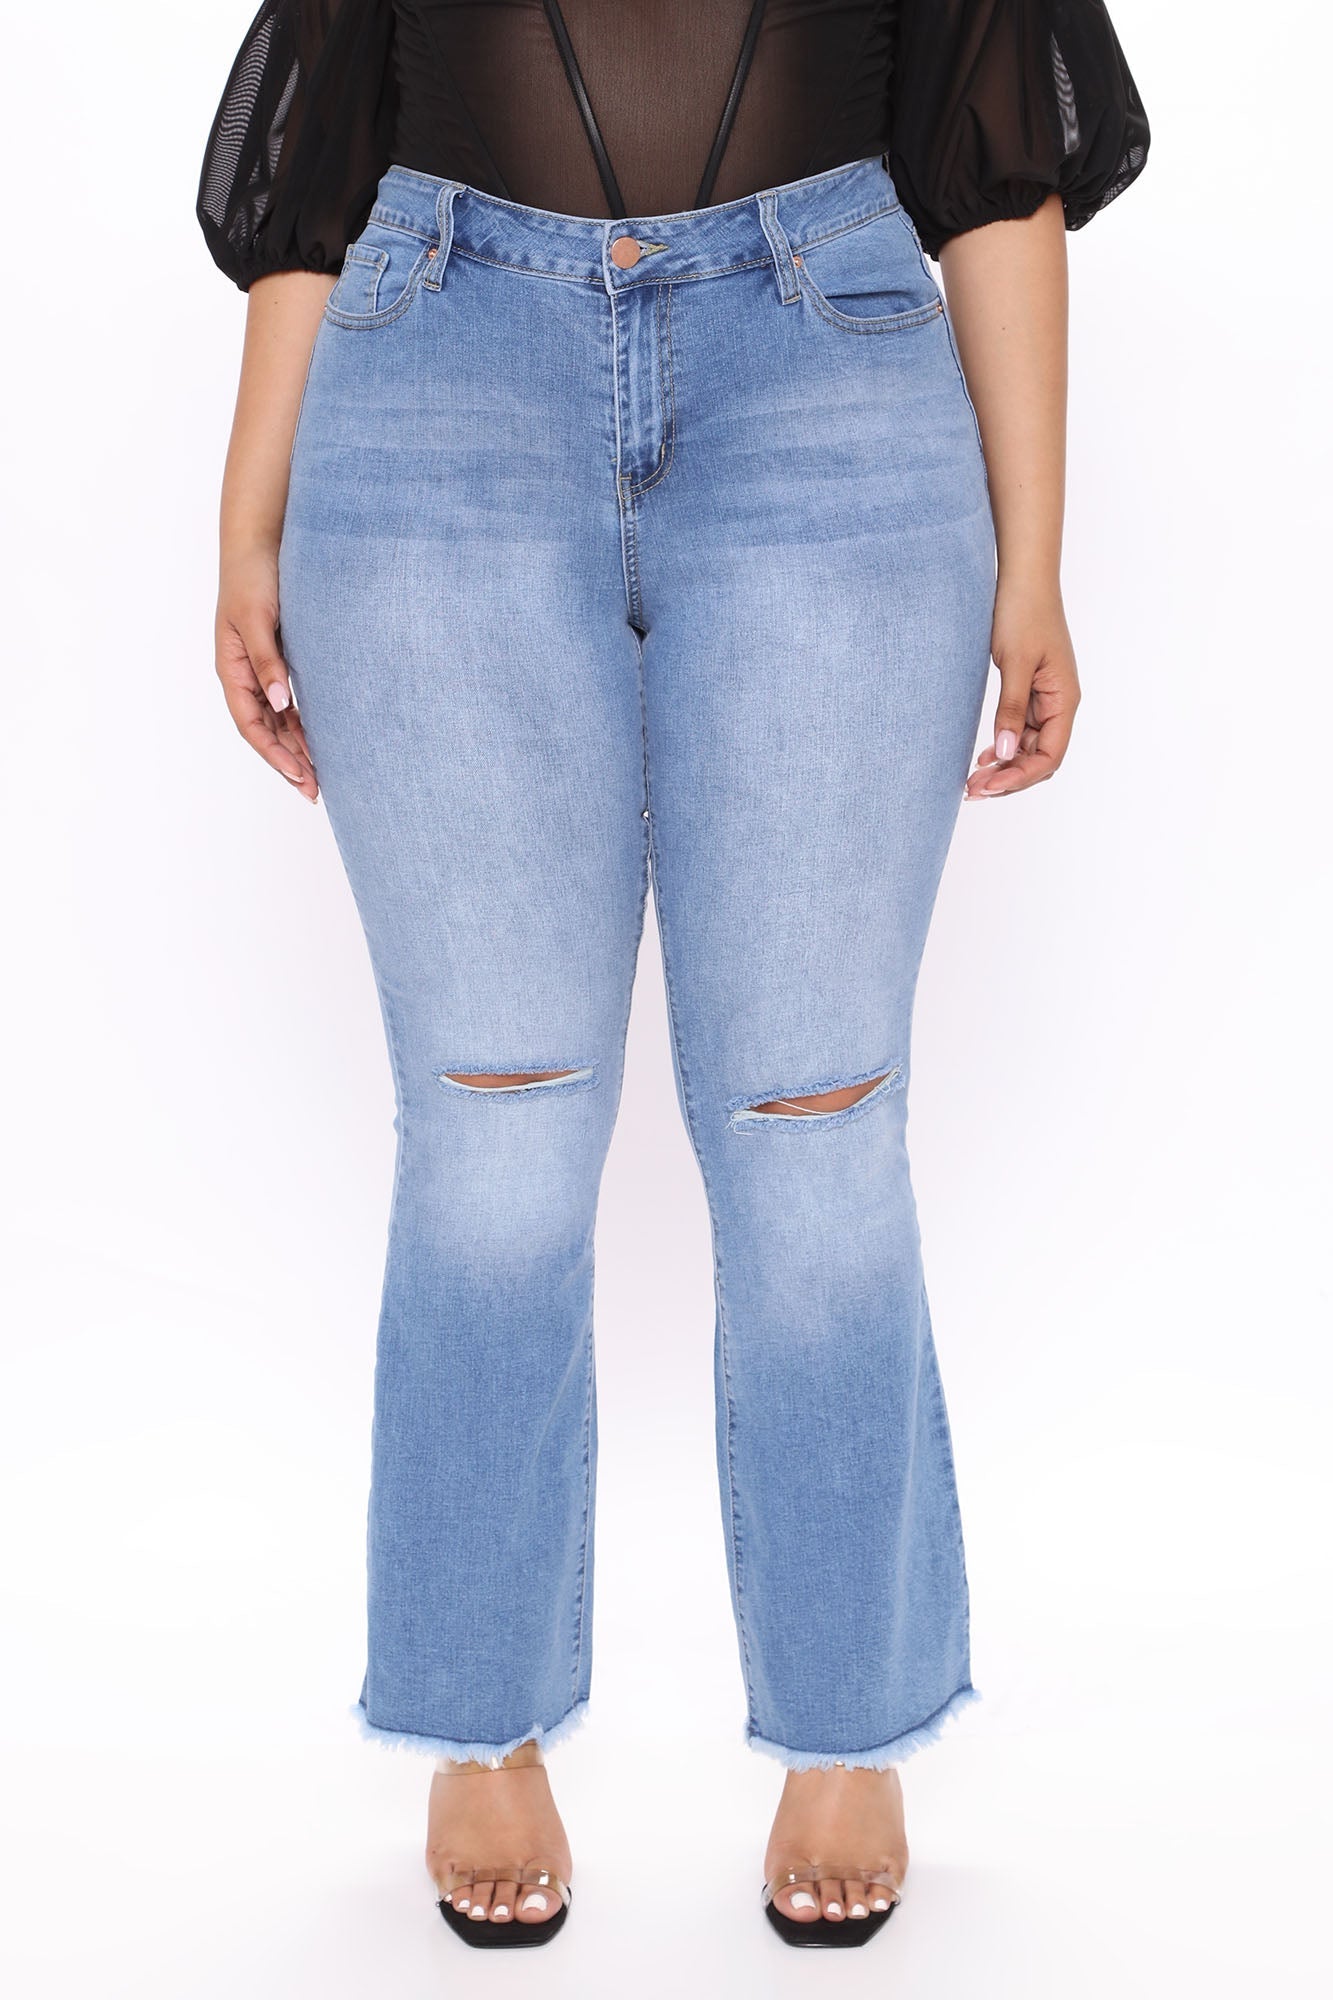 Nothing But The Best Flare Jeans - Medium Blue Wash – VP Clothes